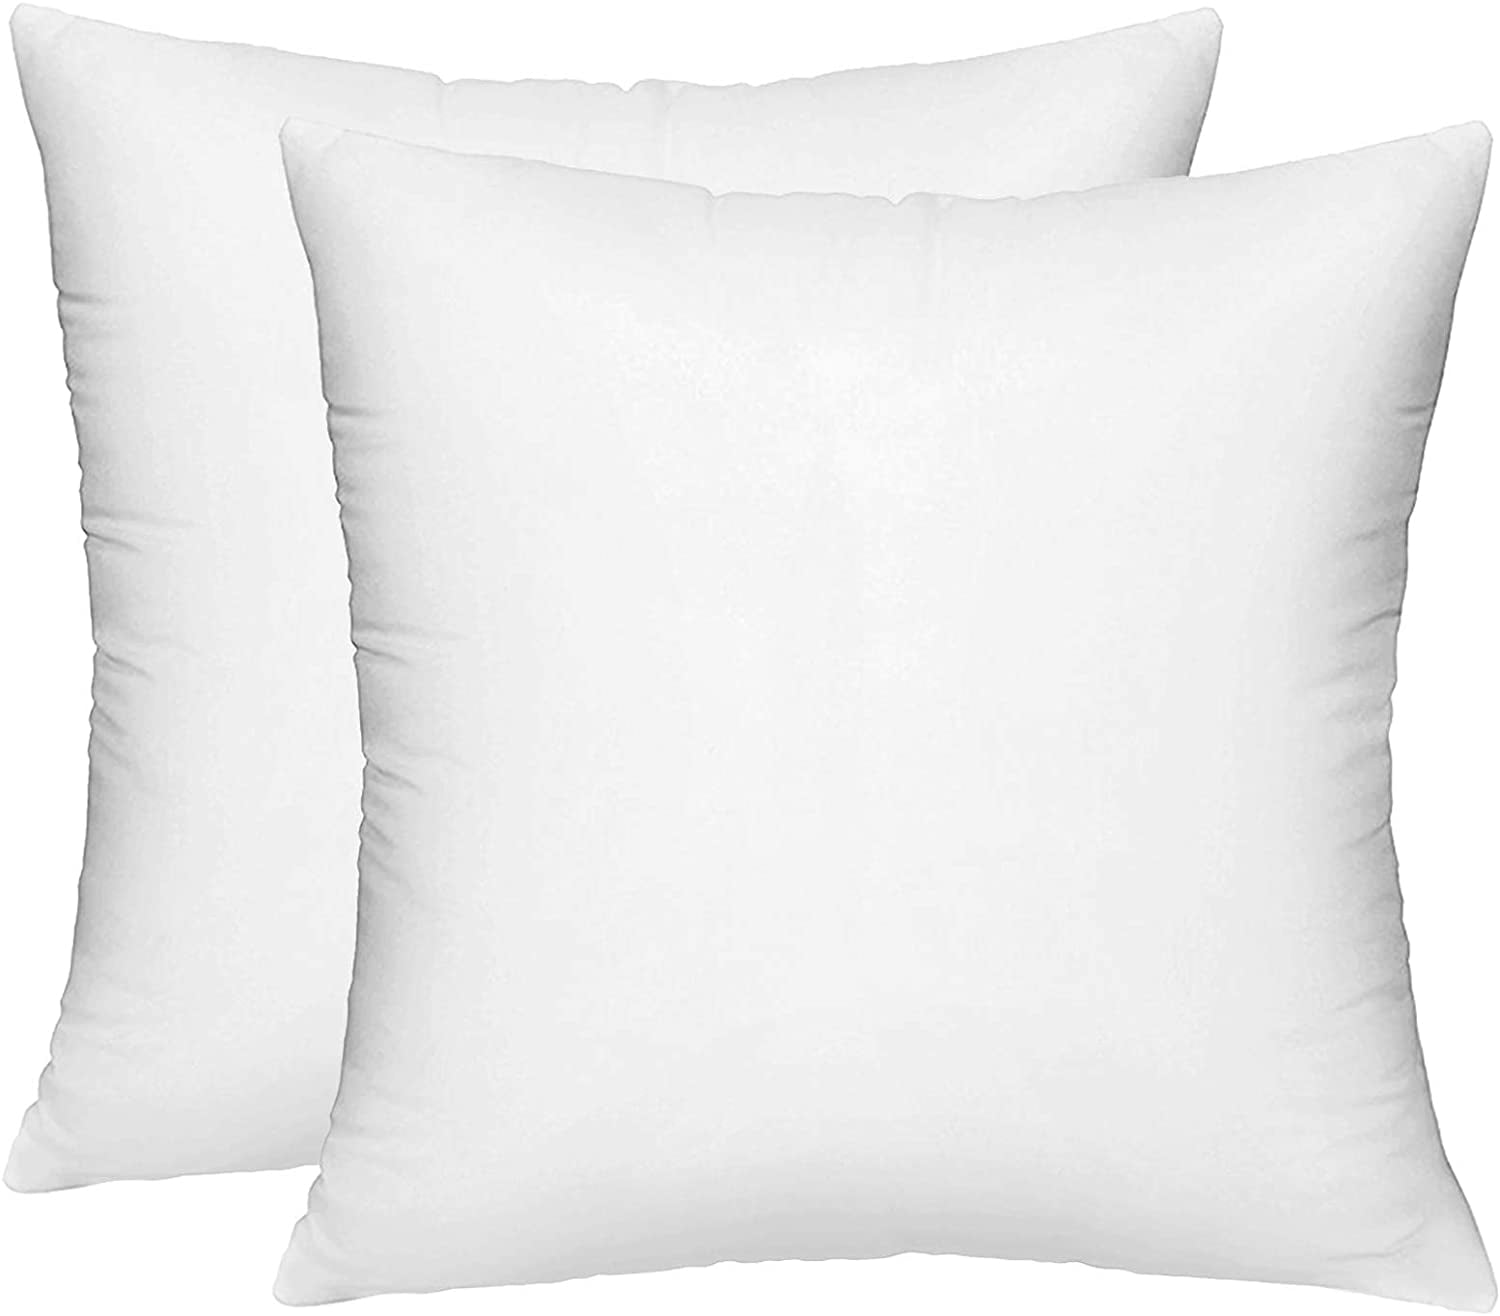 Cushion,Sham Stuffer,Cotton Cover. EDOW Throw Pillow Inserts,Set of 4 Soft Hypoallergenic Down Alternative Polyester Square Form Decorative Pillow White, 18x18